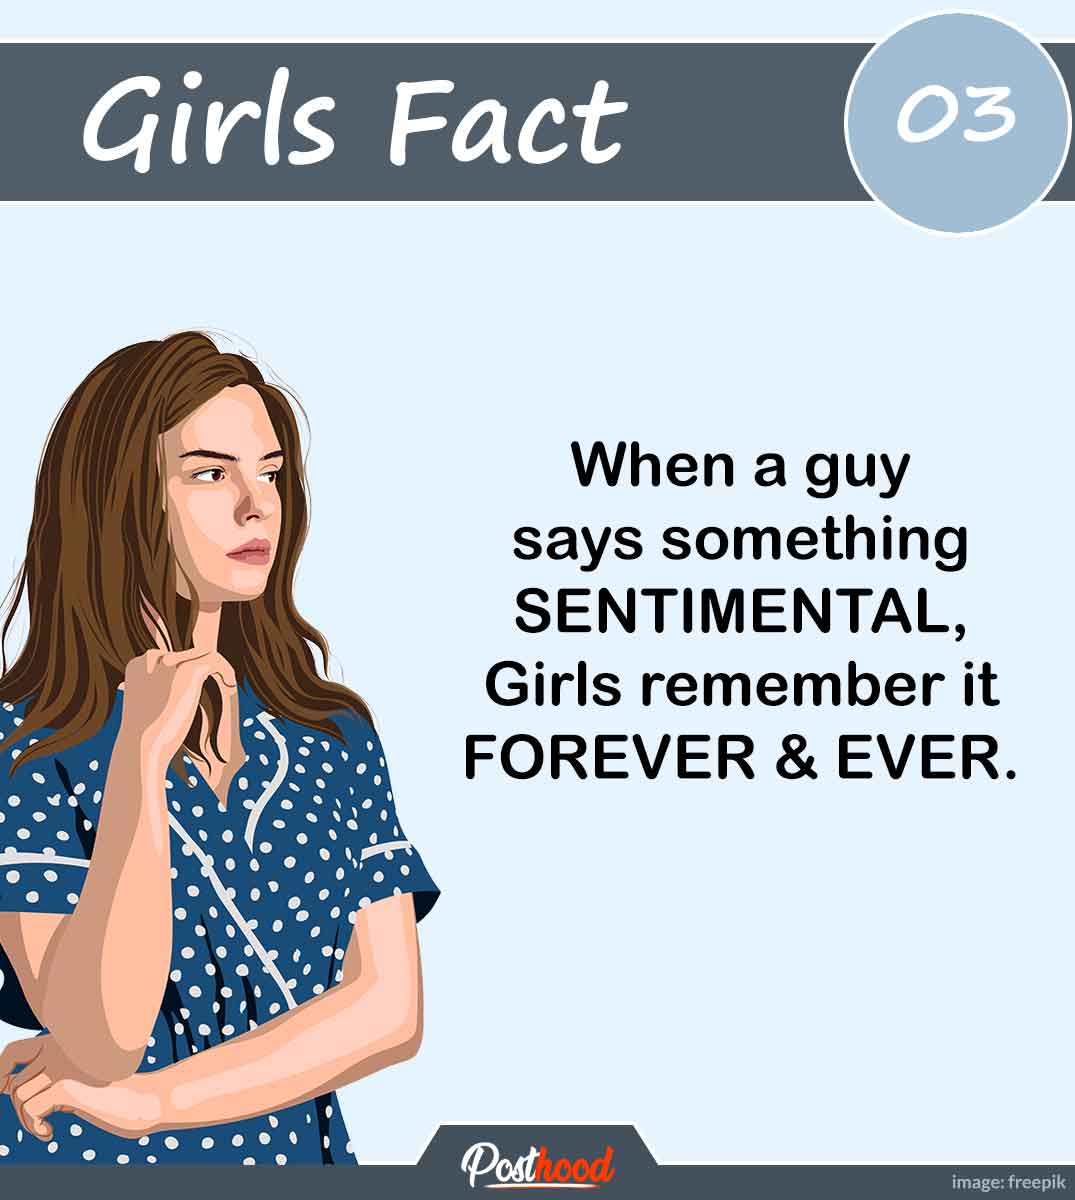 80 Psychology facts about girls’ feelings and love that every guy should know if ready for dating a woman. Amazing girl's facts. 